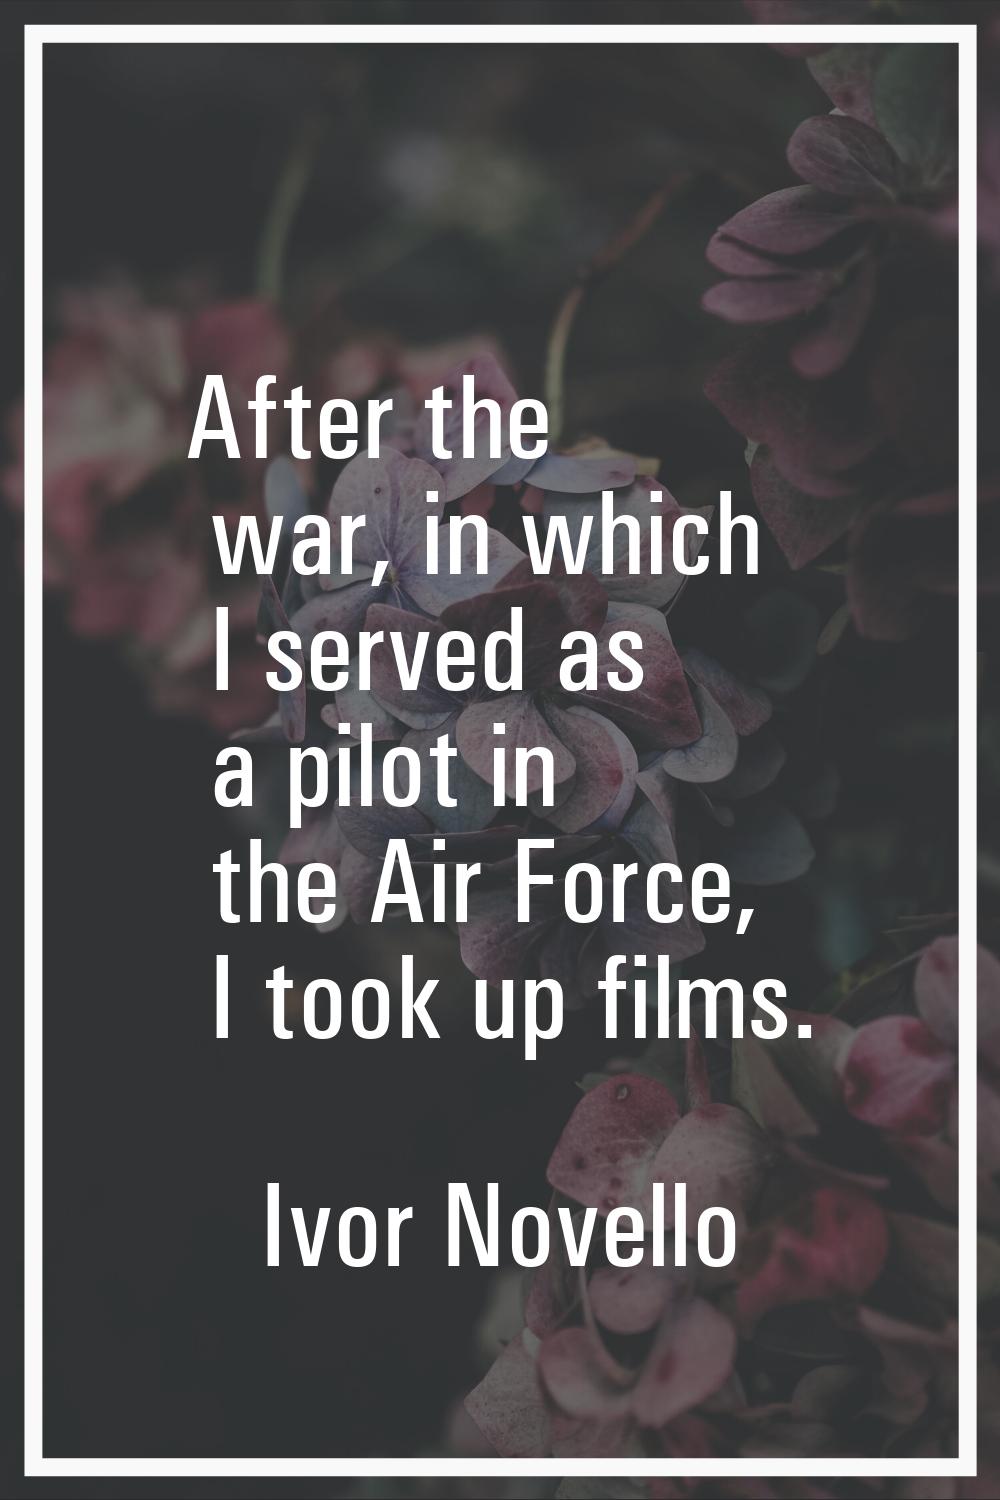 After the war, in which I served as a pilot in the Air Force, I took up films.